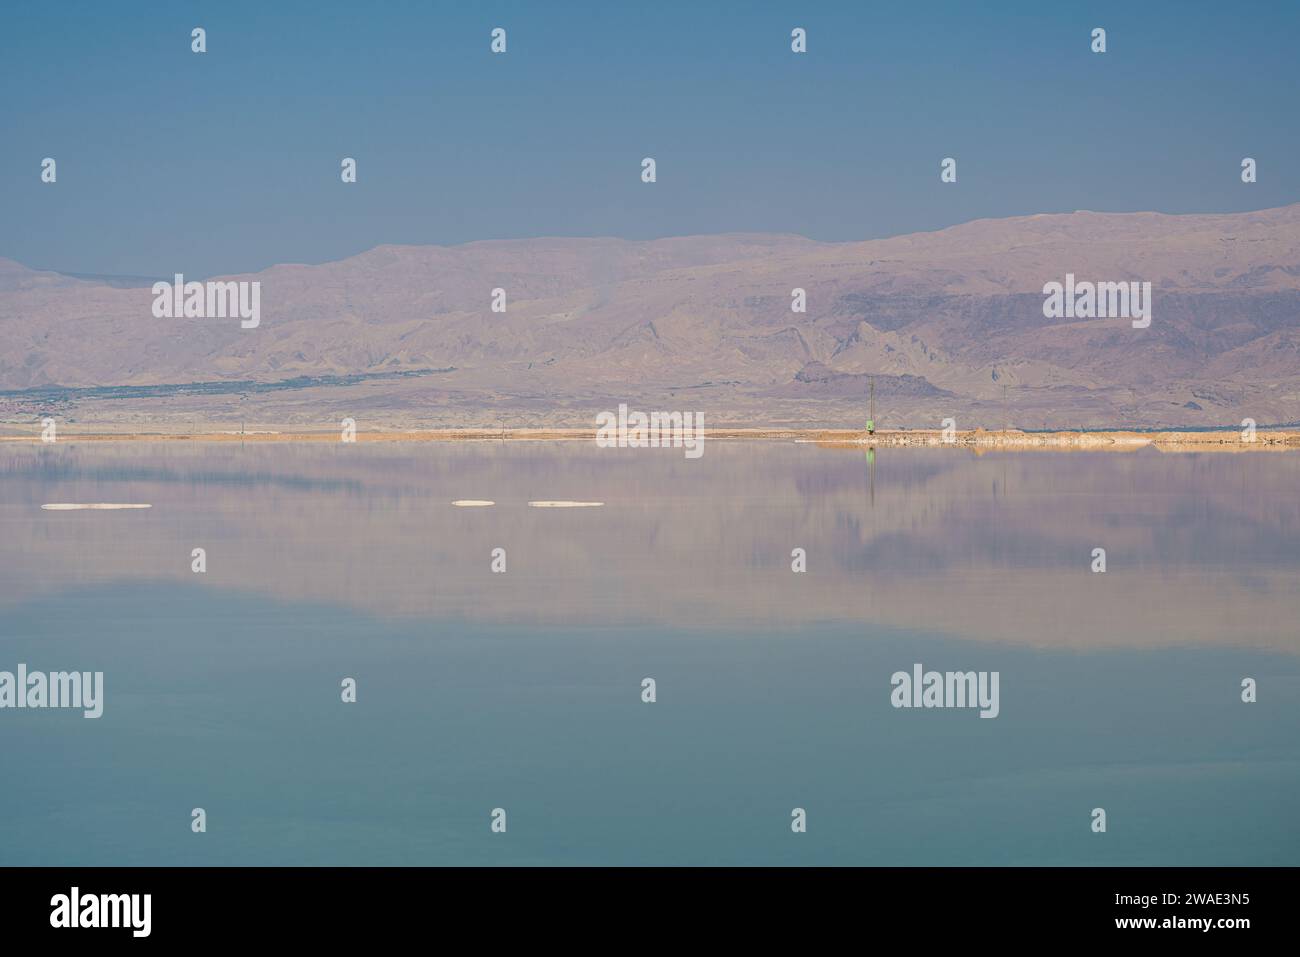 Dead Sea landscape, arid mountains reflected on the surface lake Stock Photo